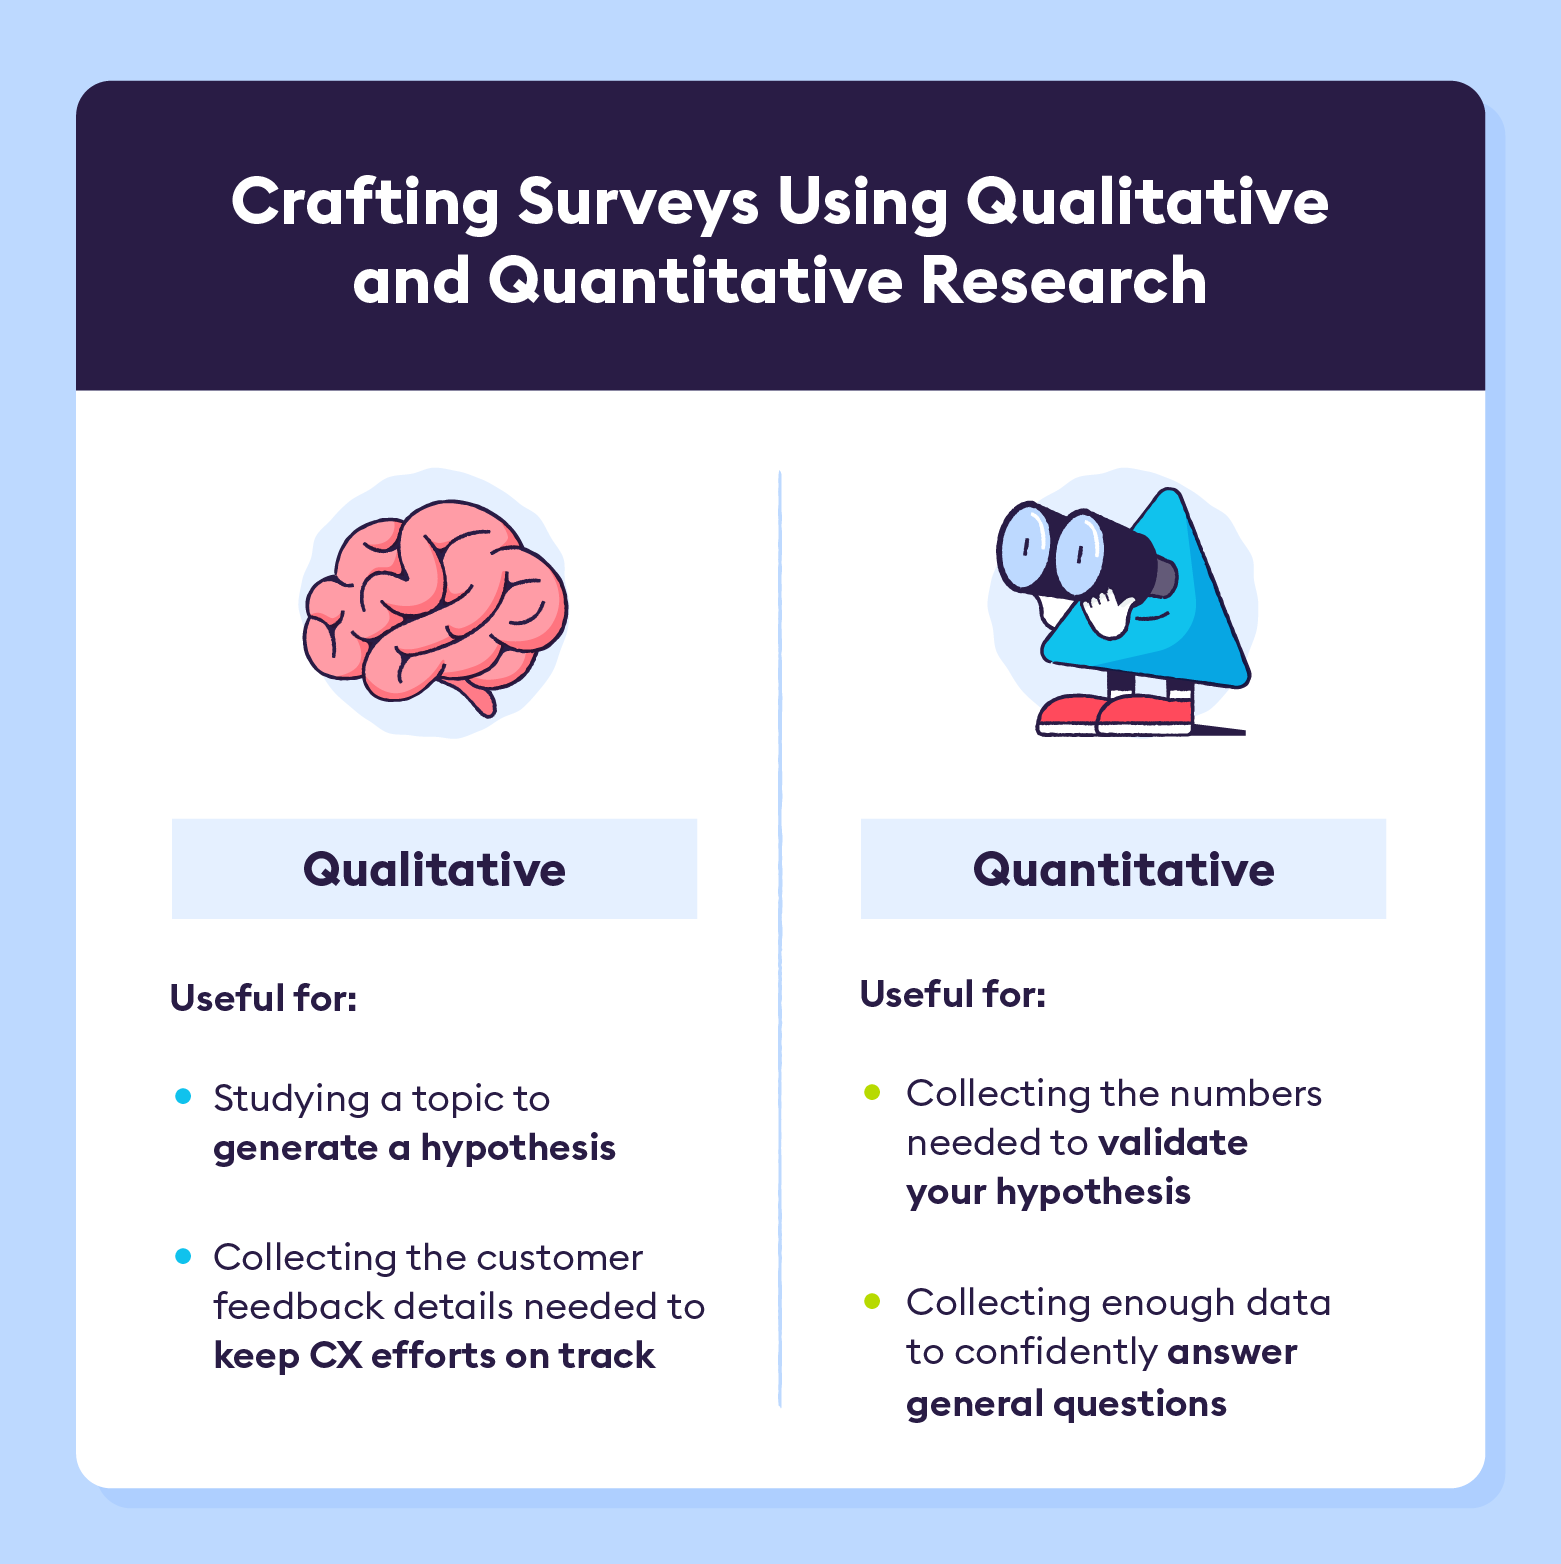 how-to-use-qualitative-vs-quantitative-research-when-crafting-survey